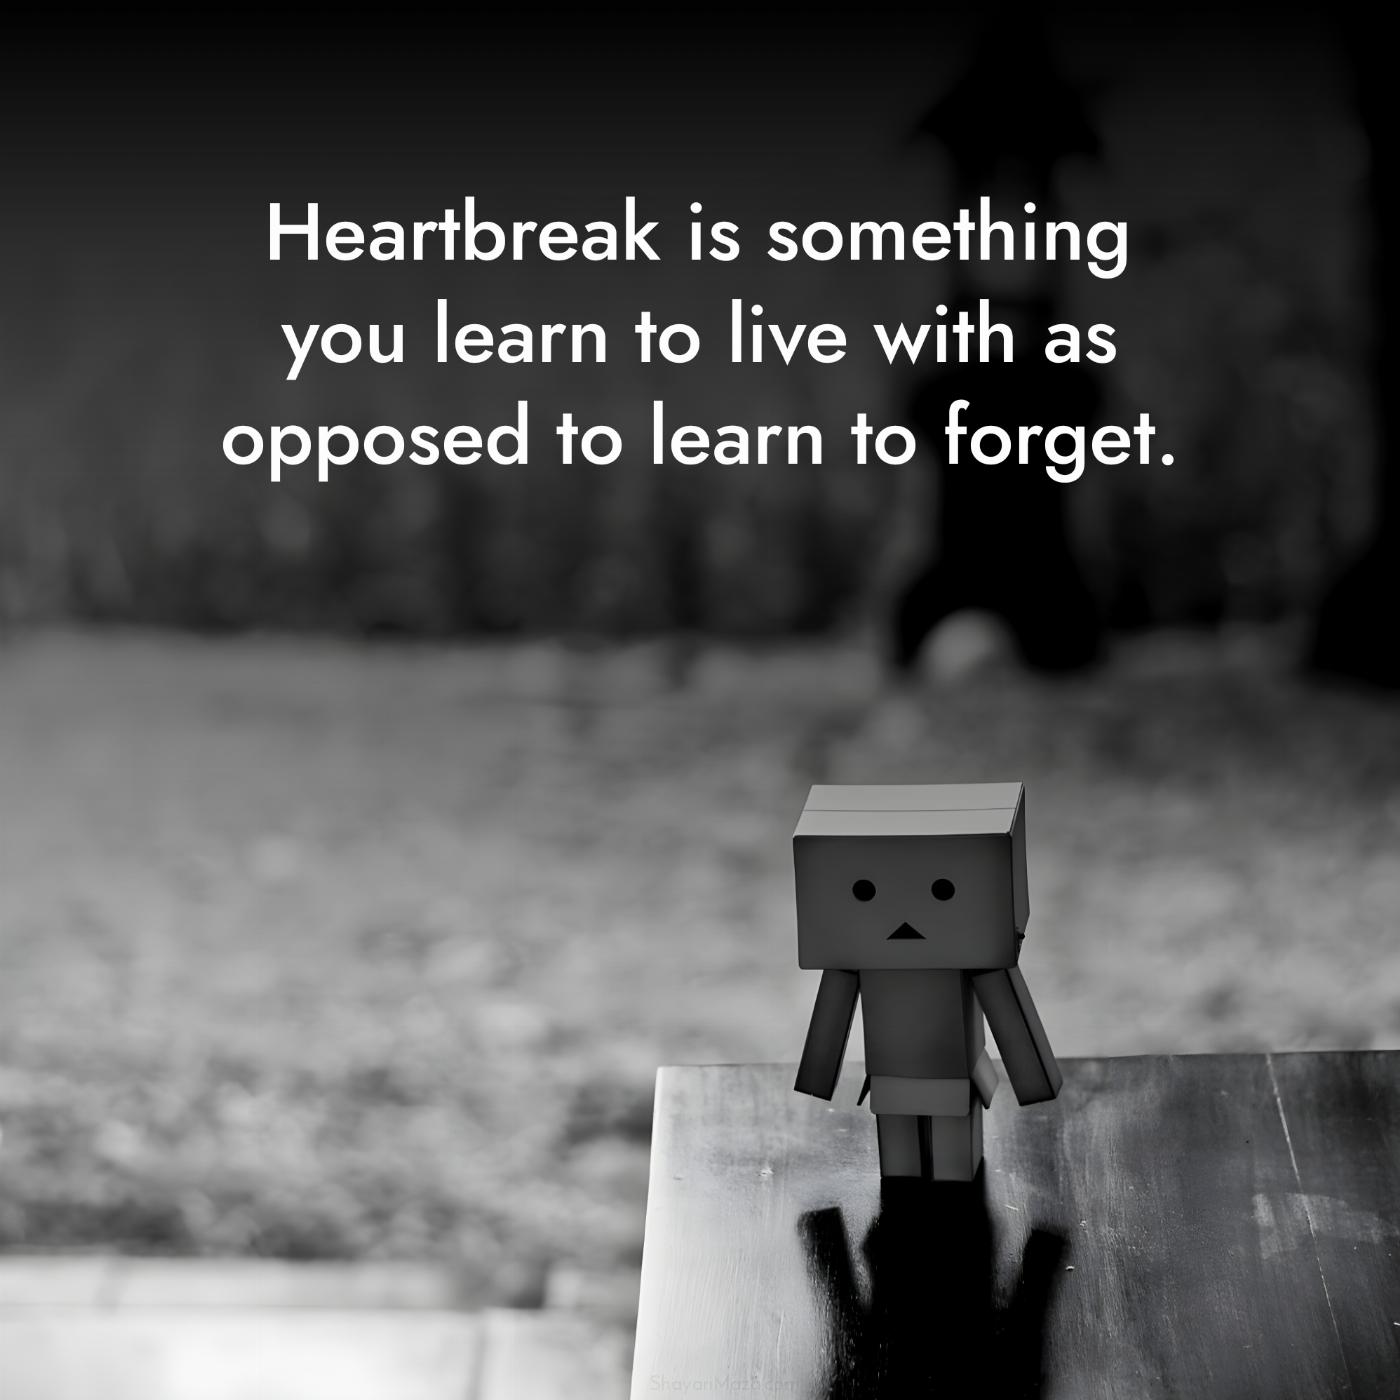 Heartbreak is something you learn to live with as opposed